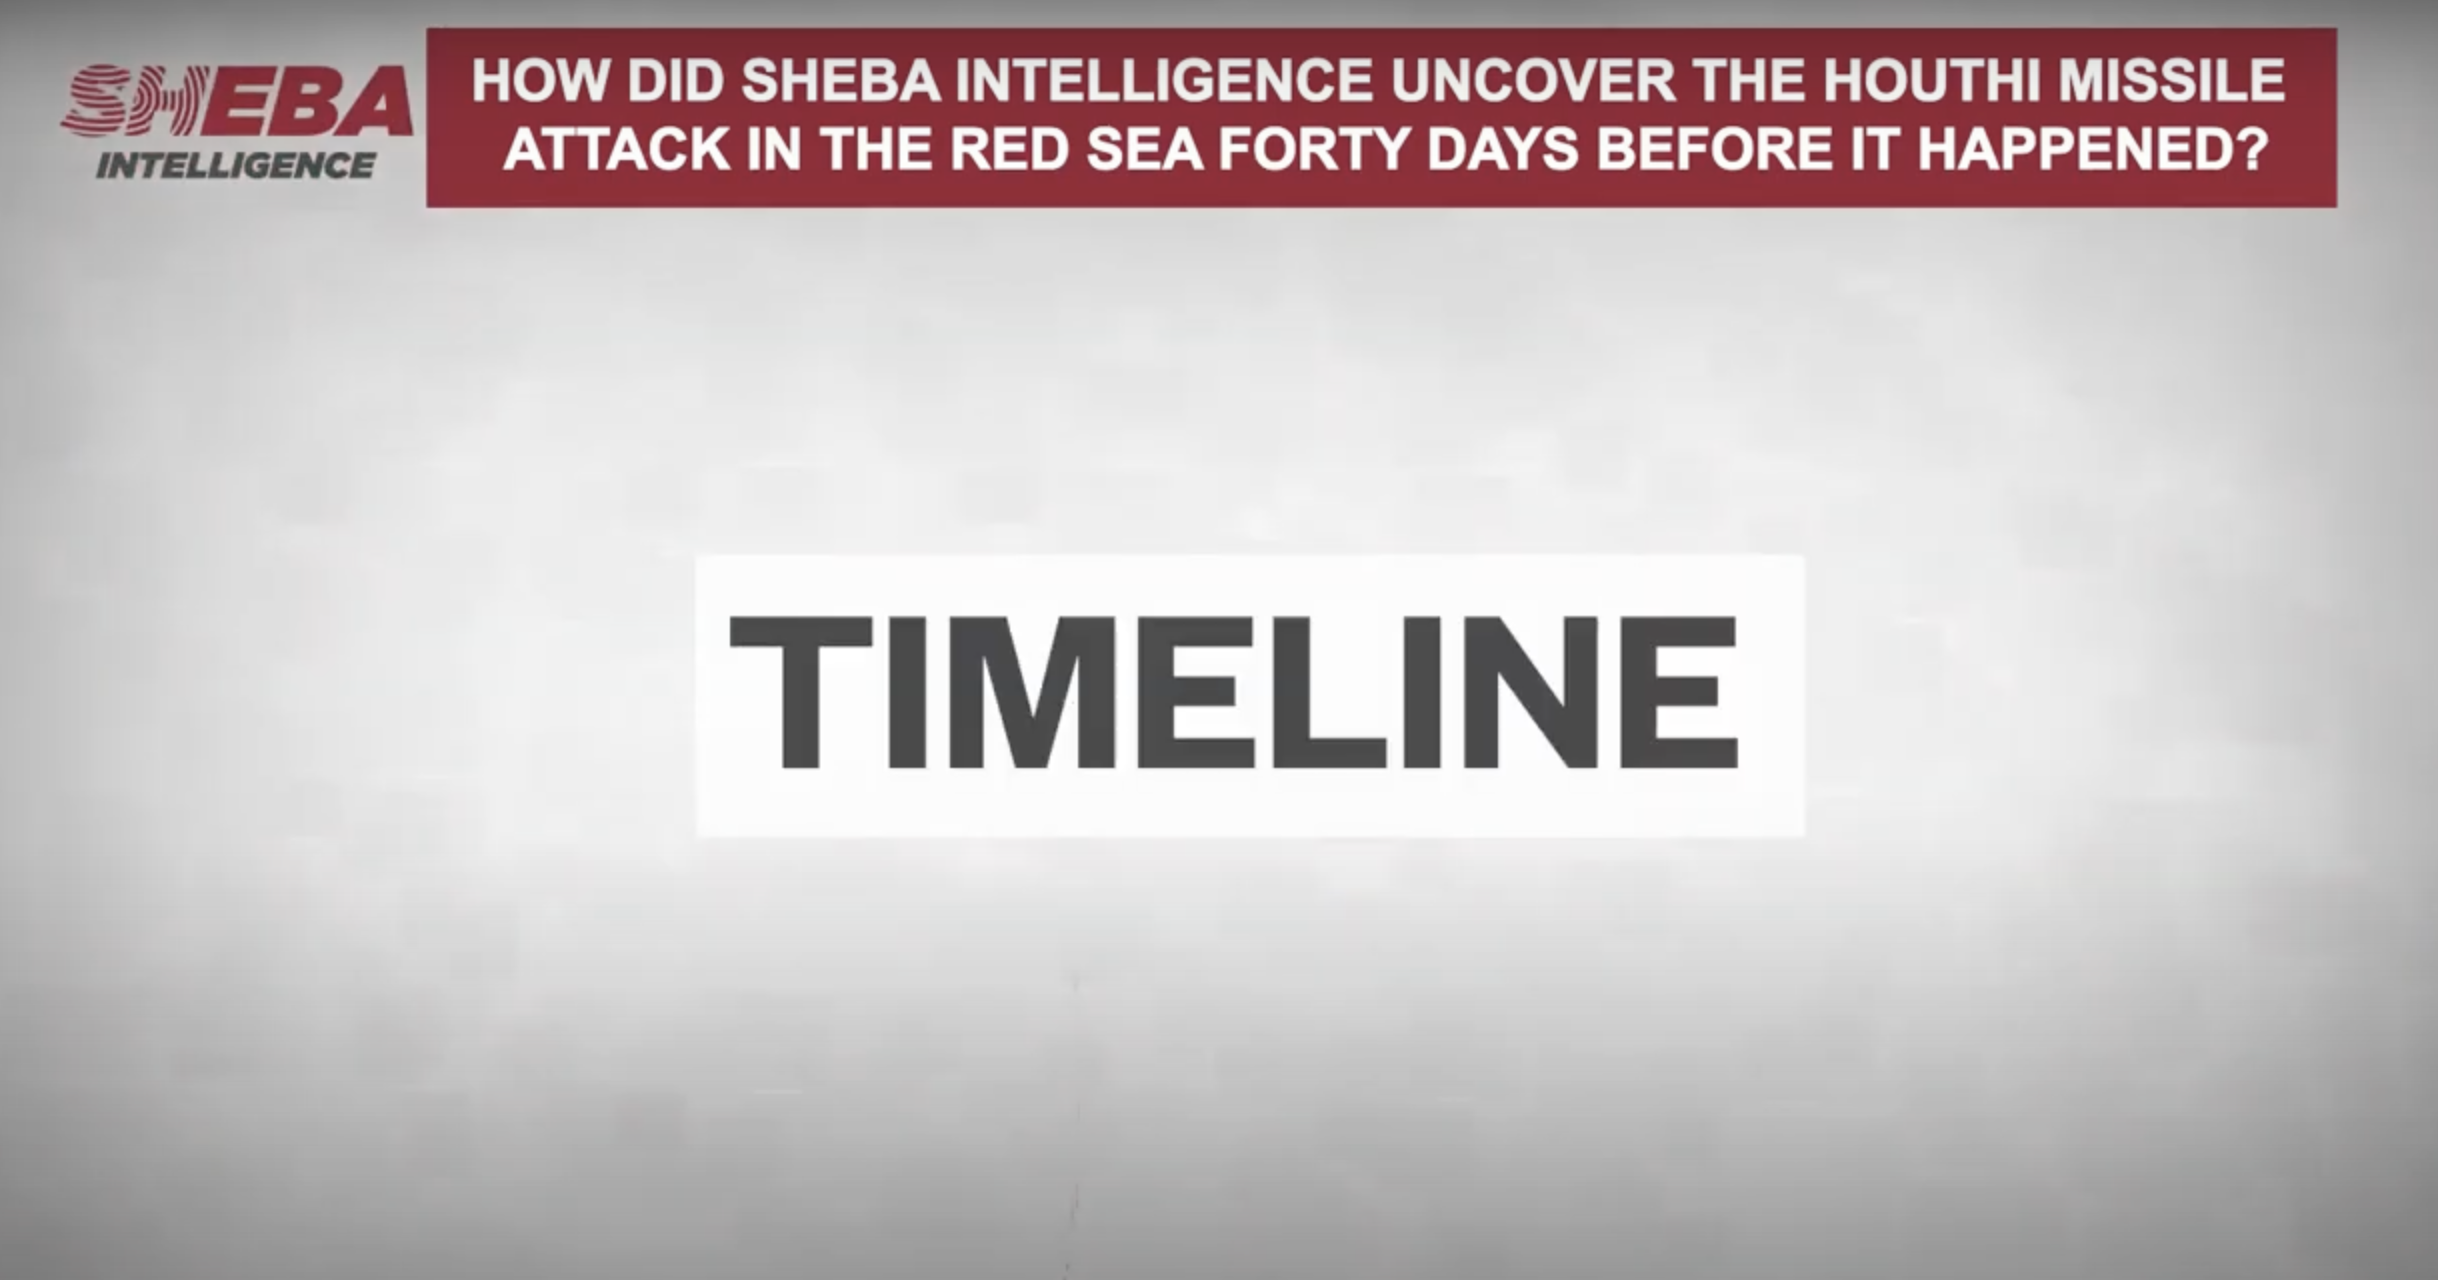 How Did Sheba Intelligence Uncover the Houthi Attack in the Red Sea Forty Days Before It Happened? (Video)